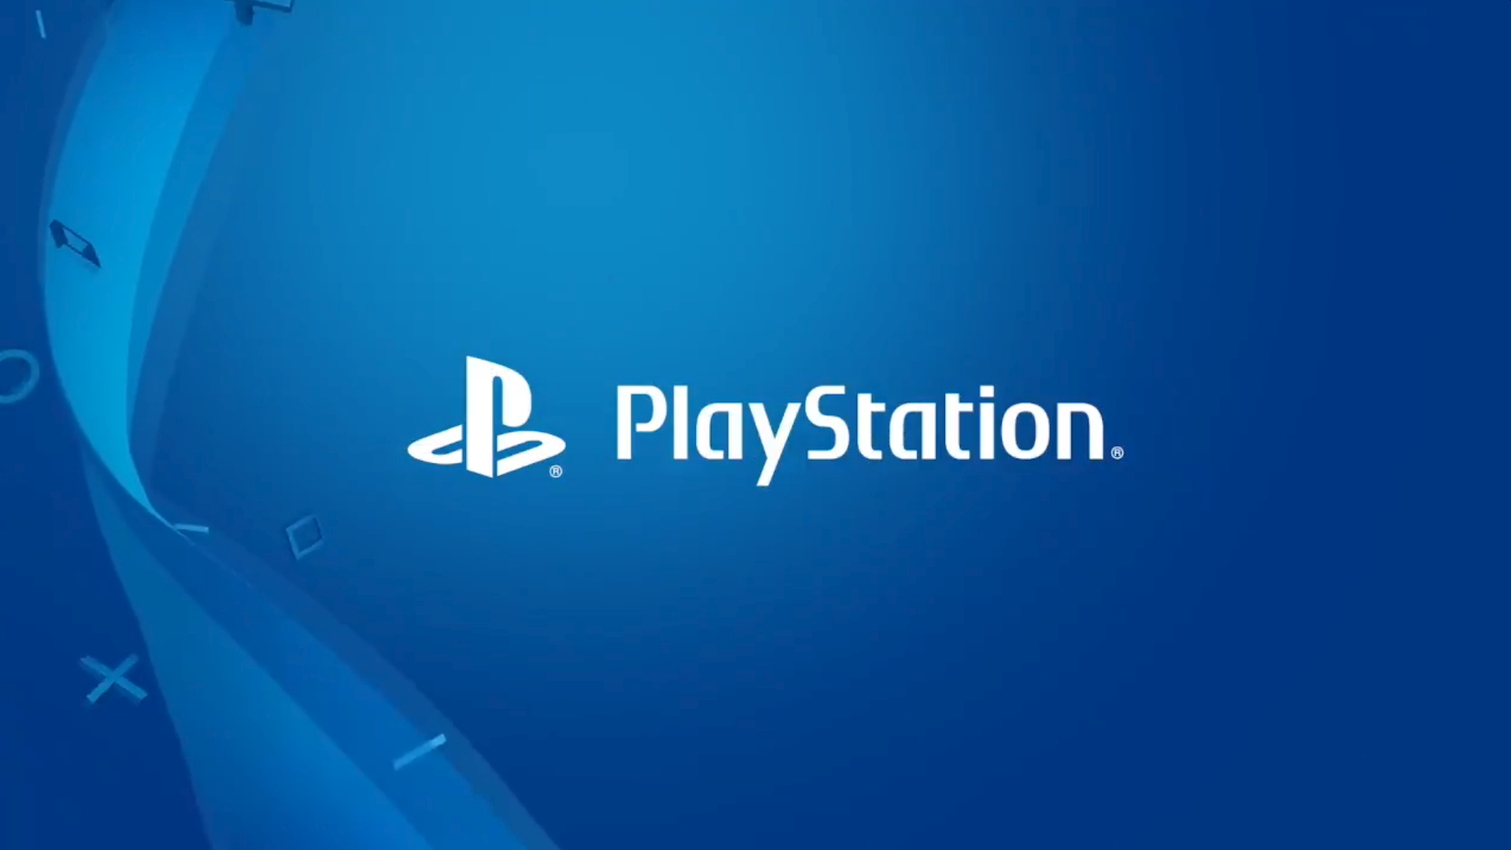 PlayStation 5’s Backwards Compatibility Will Reportedly Support Thousands Of PS4 Games By Launch